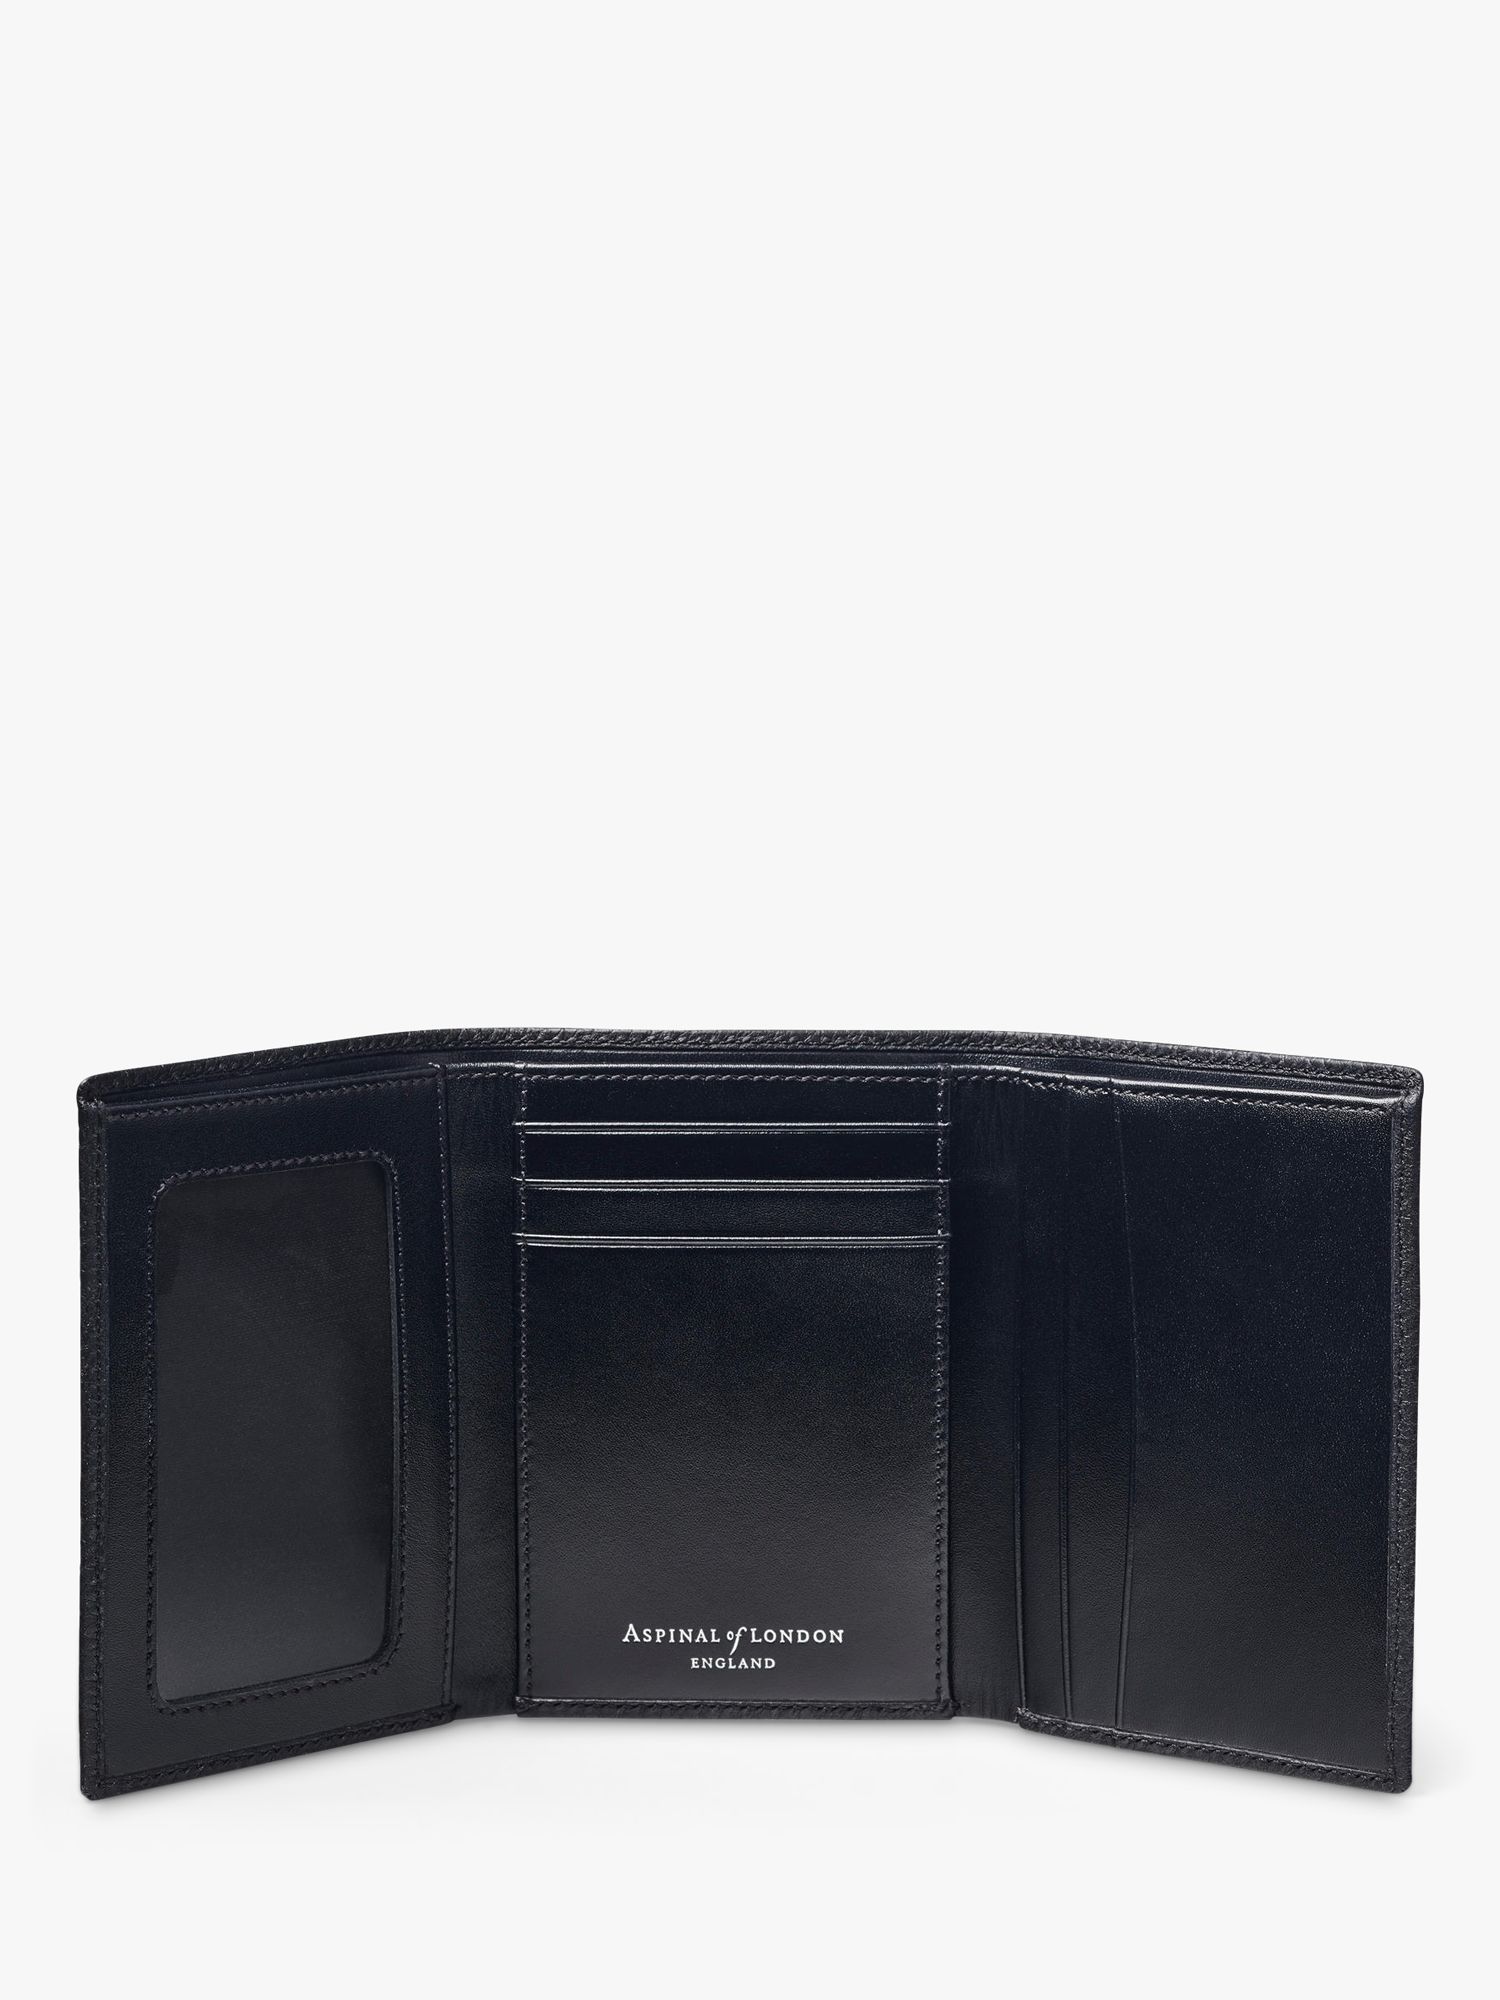 Buy Aspinal of London Pebble Leather Trifold Wallet Online at johnlewis.com